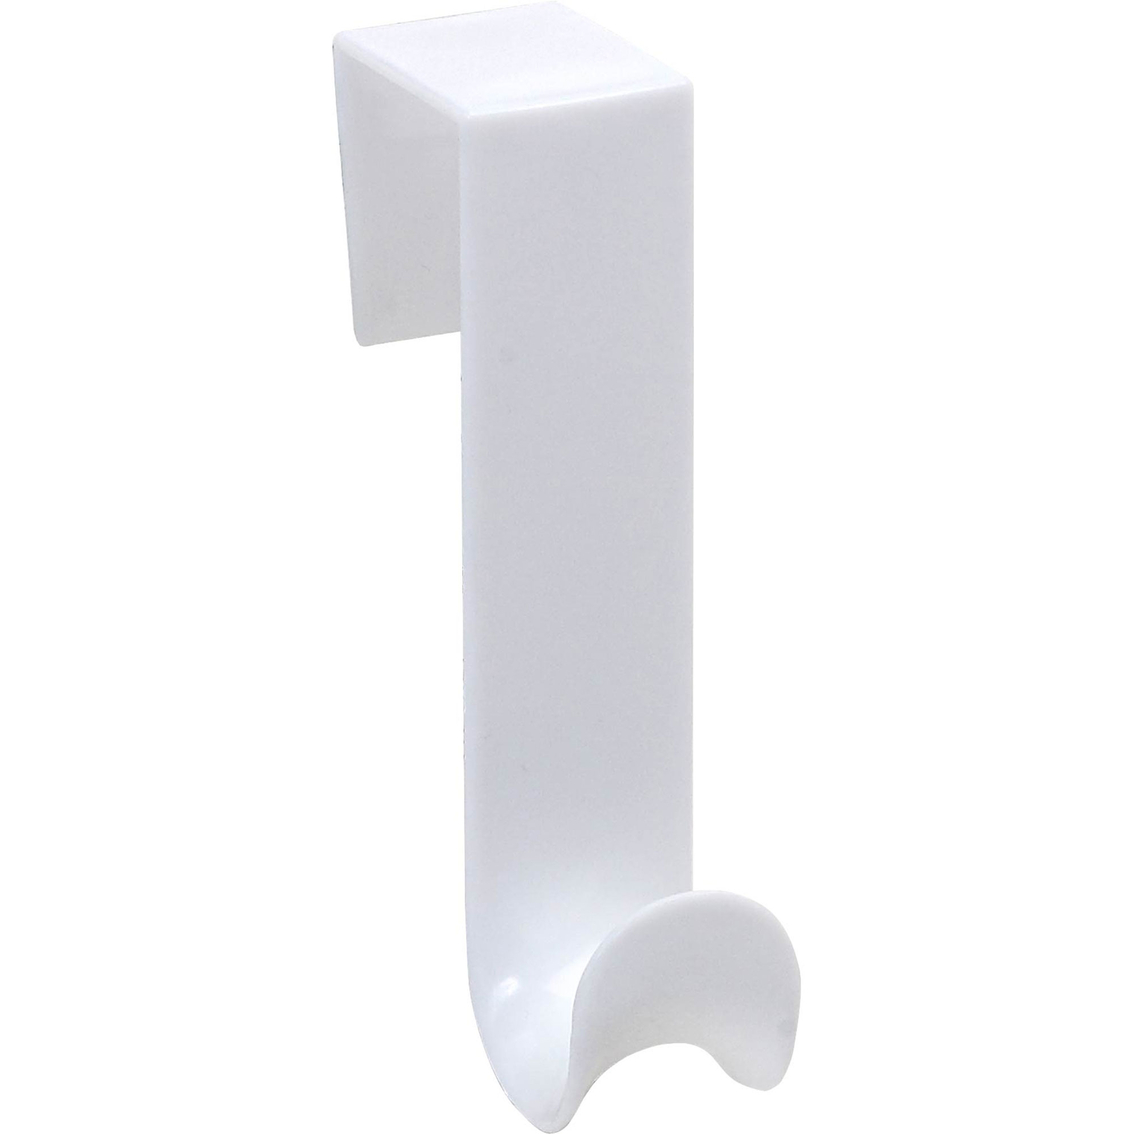 Zenith Products White Over The Door Hooks 2 Pk. Closet Organization Household Shop The